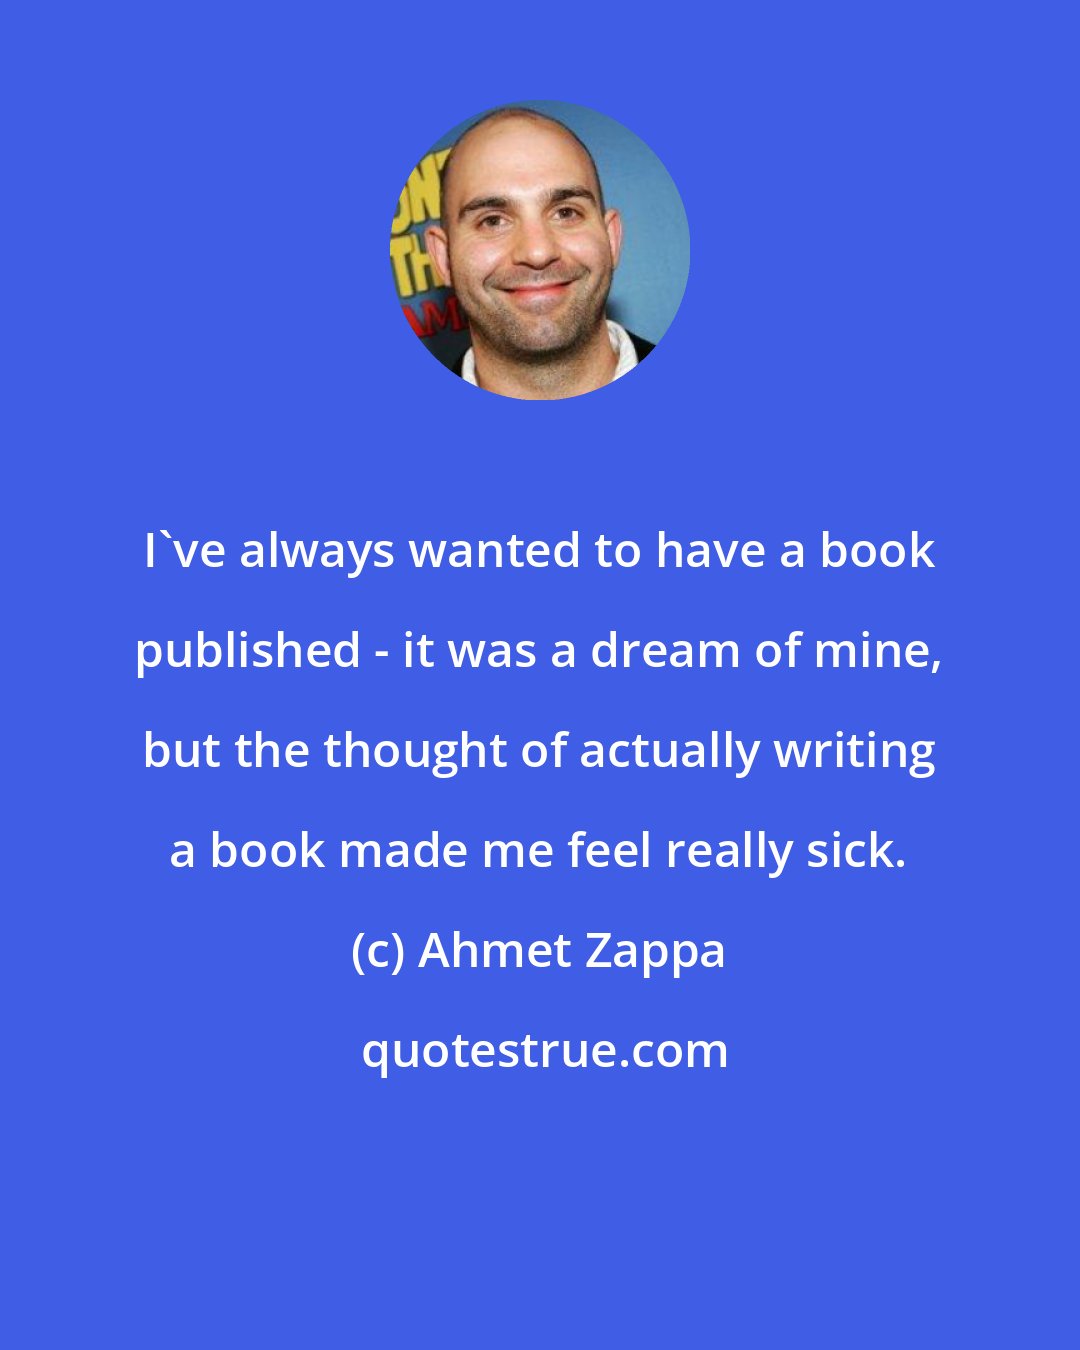 Ahmet Zappa: I've always wanted to have a book published - it was a dream of mine, but the thought of actually writing a book made me feel really sick.